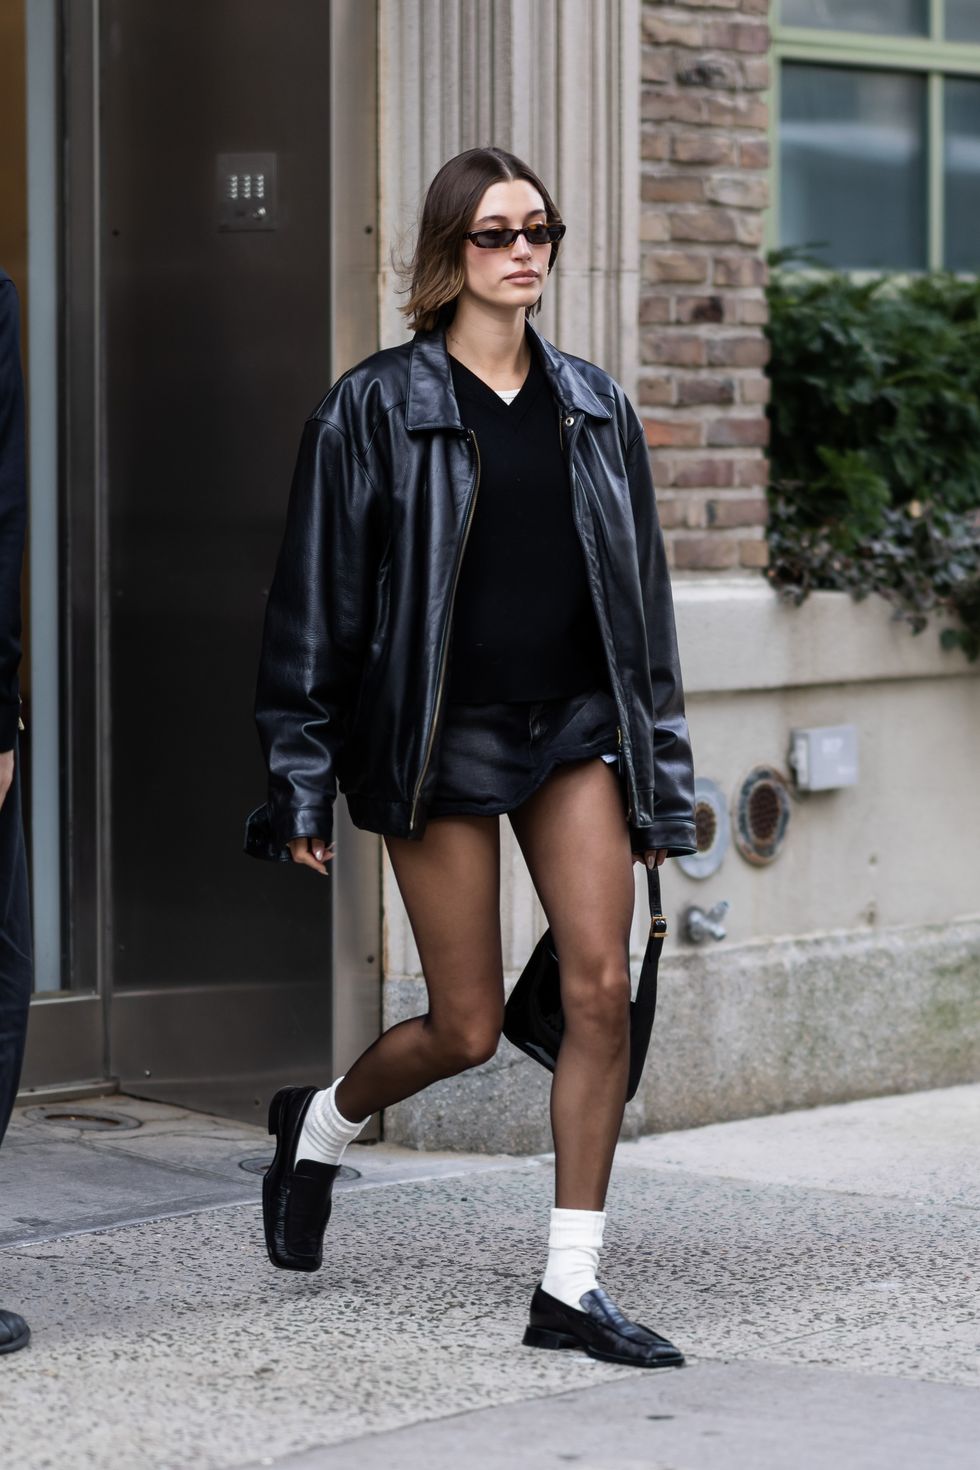 Hailey Bieber Wears the No-Pants Trend in New York City